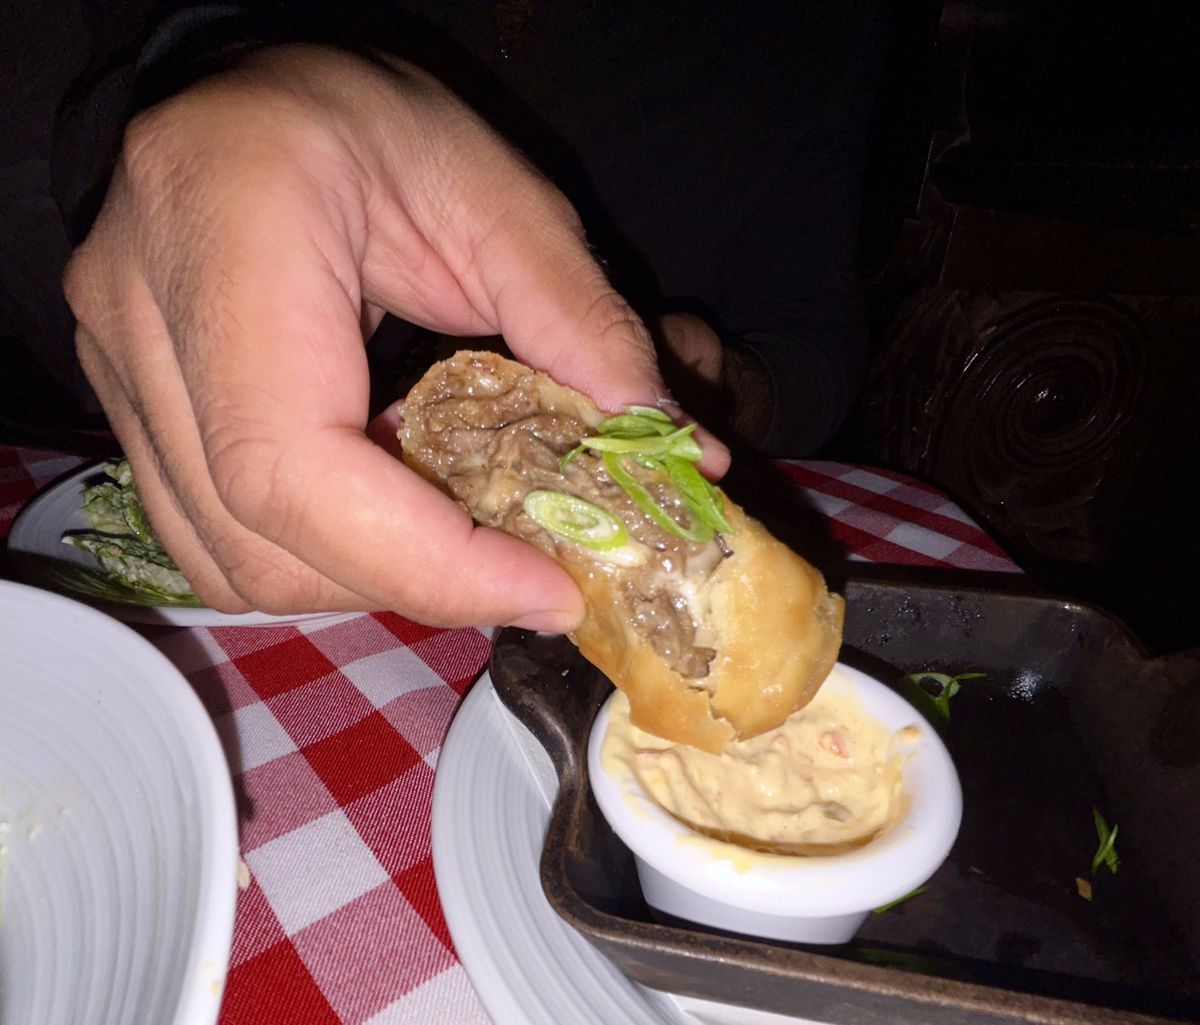 A hand dunks an egg roll filled with gray beef and American cheese into a pale sauce.